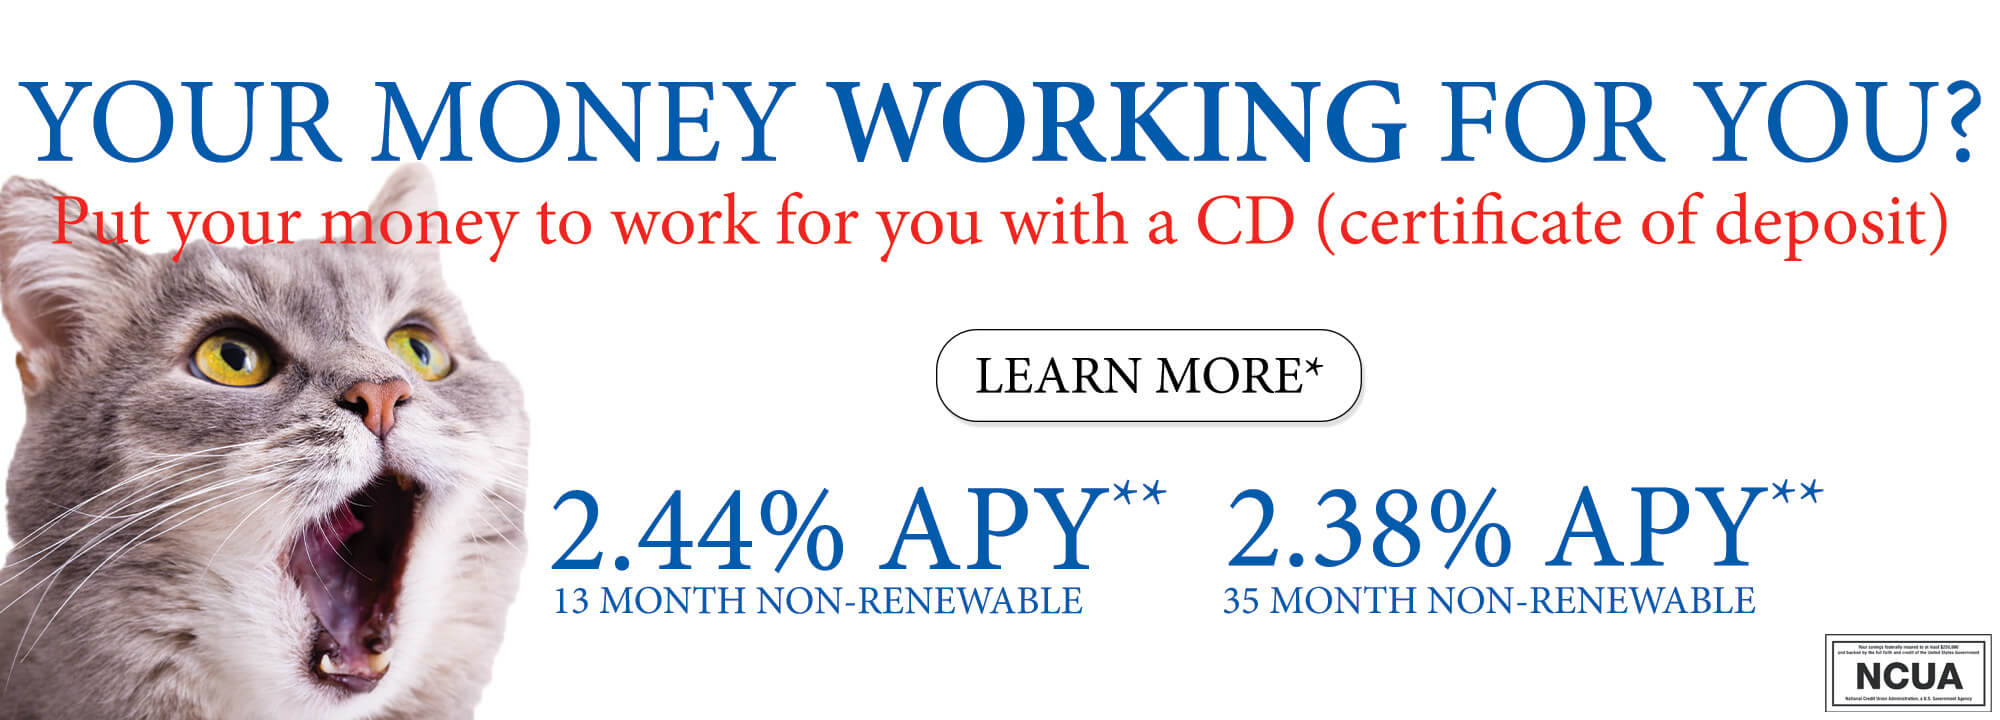 Your money working for you? Put your money to work for you with a CD (certificate of deposit) 2.44% APY** 2.38% APY** *learn more